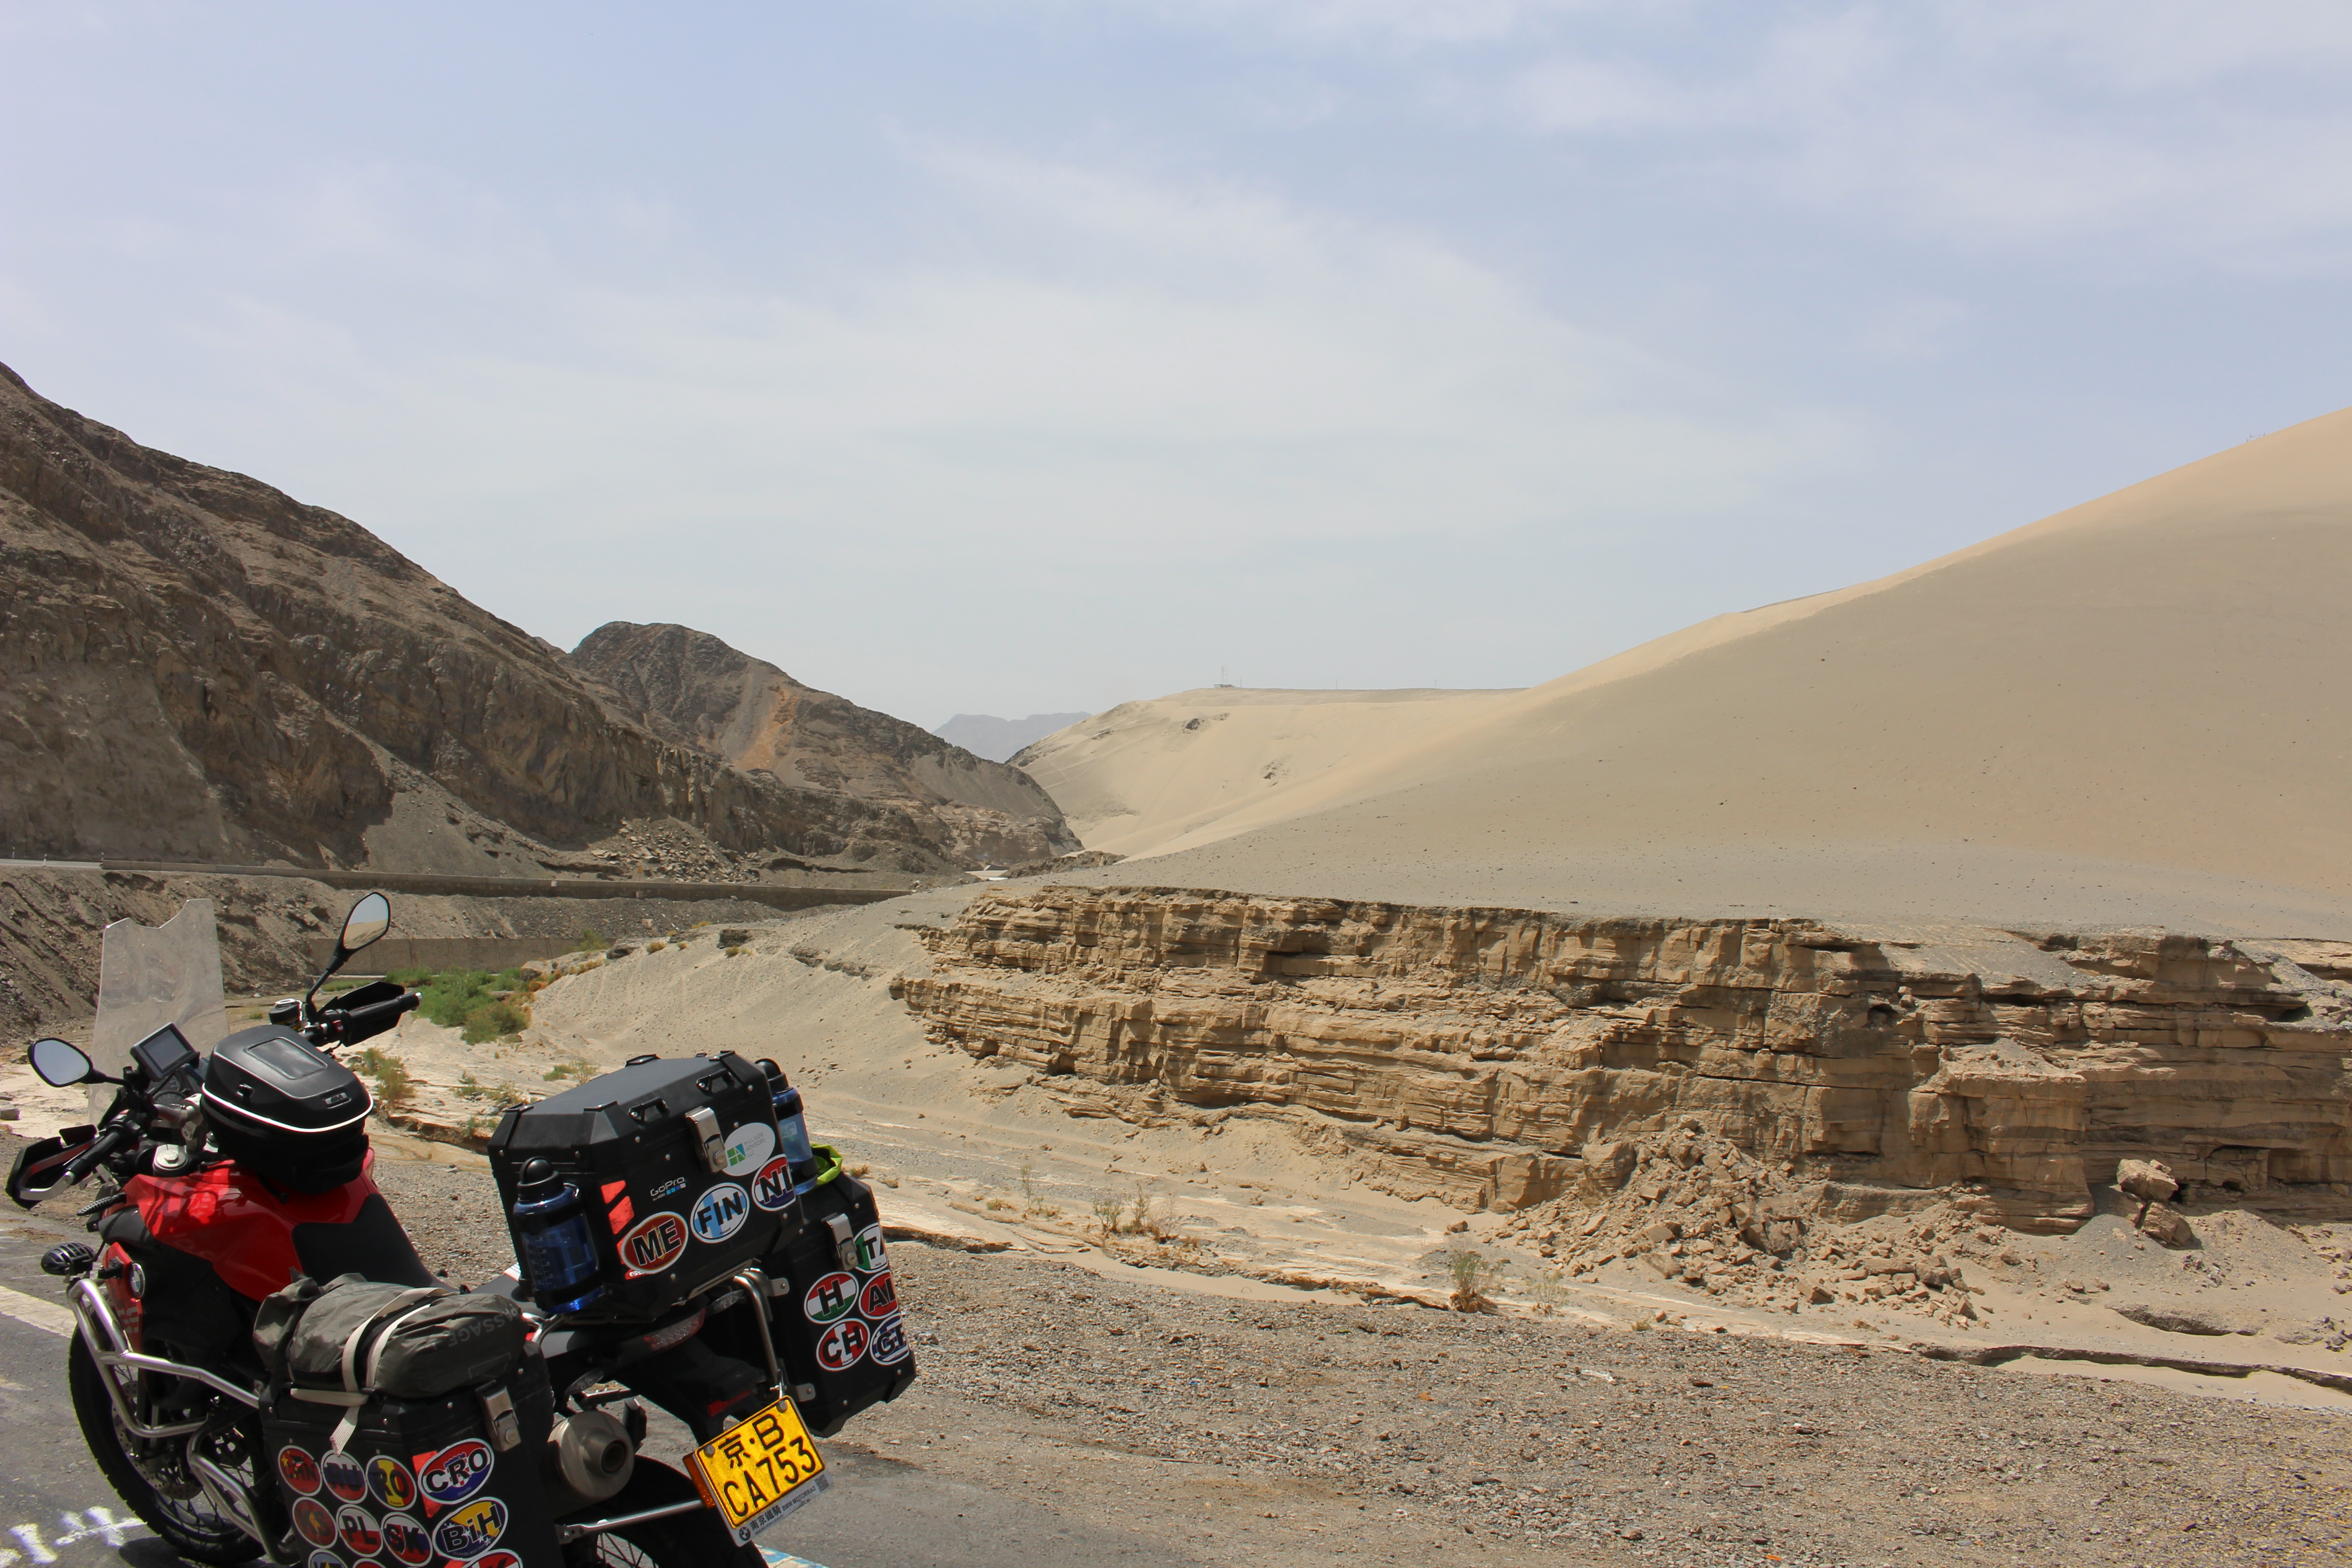 The Road to Kashgar